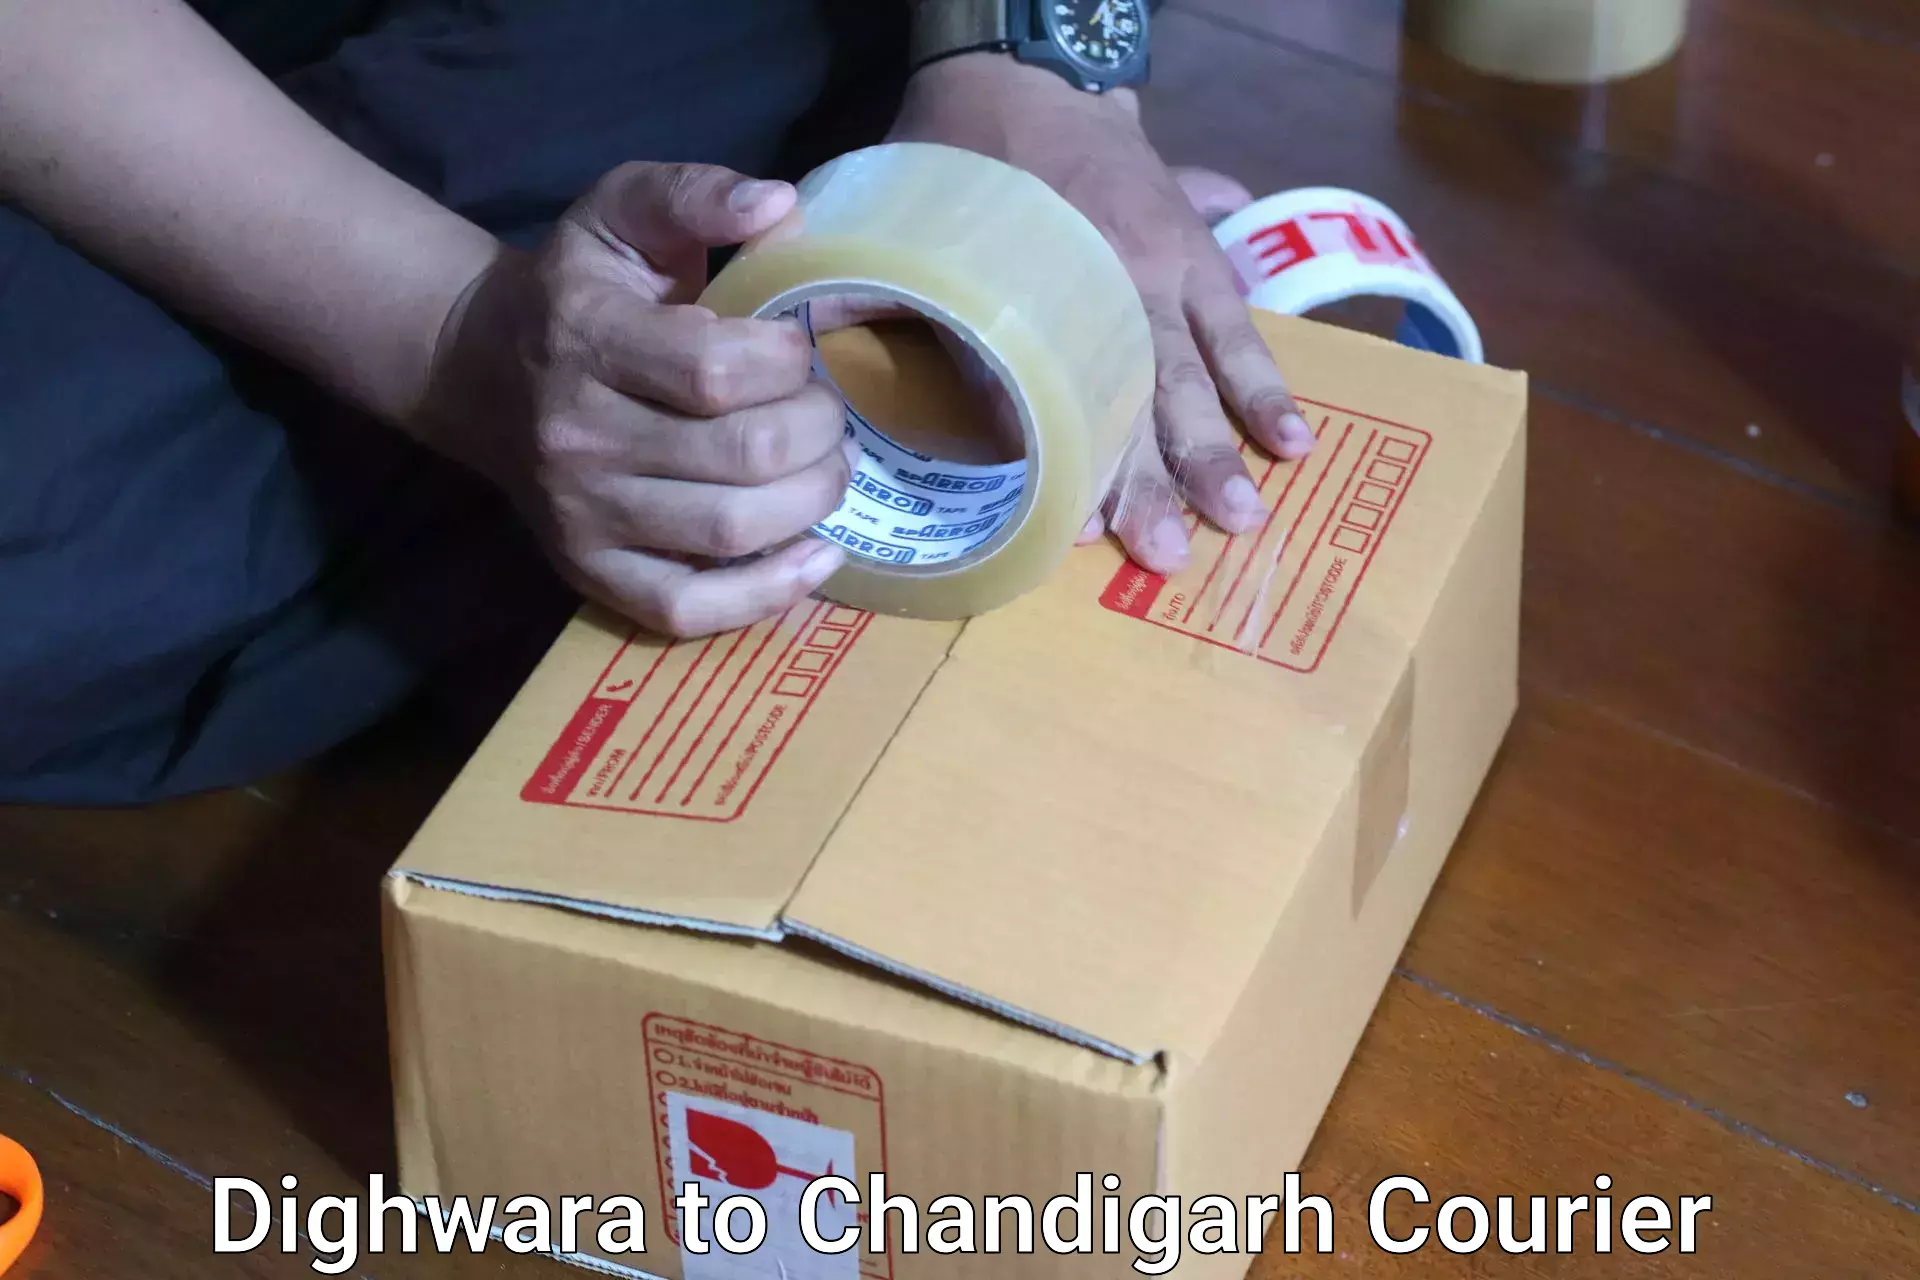 Luggage shipment specialists Dighwara to Chandigarh